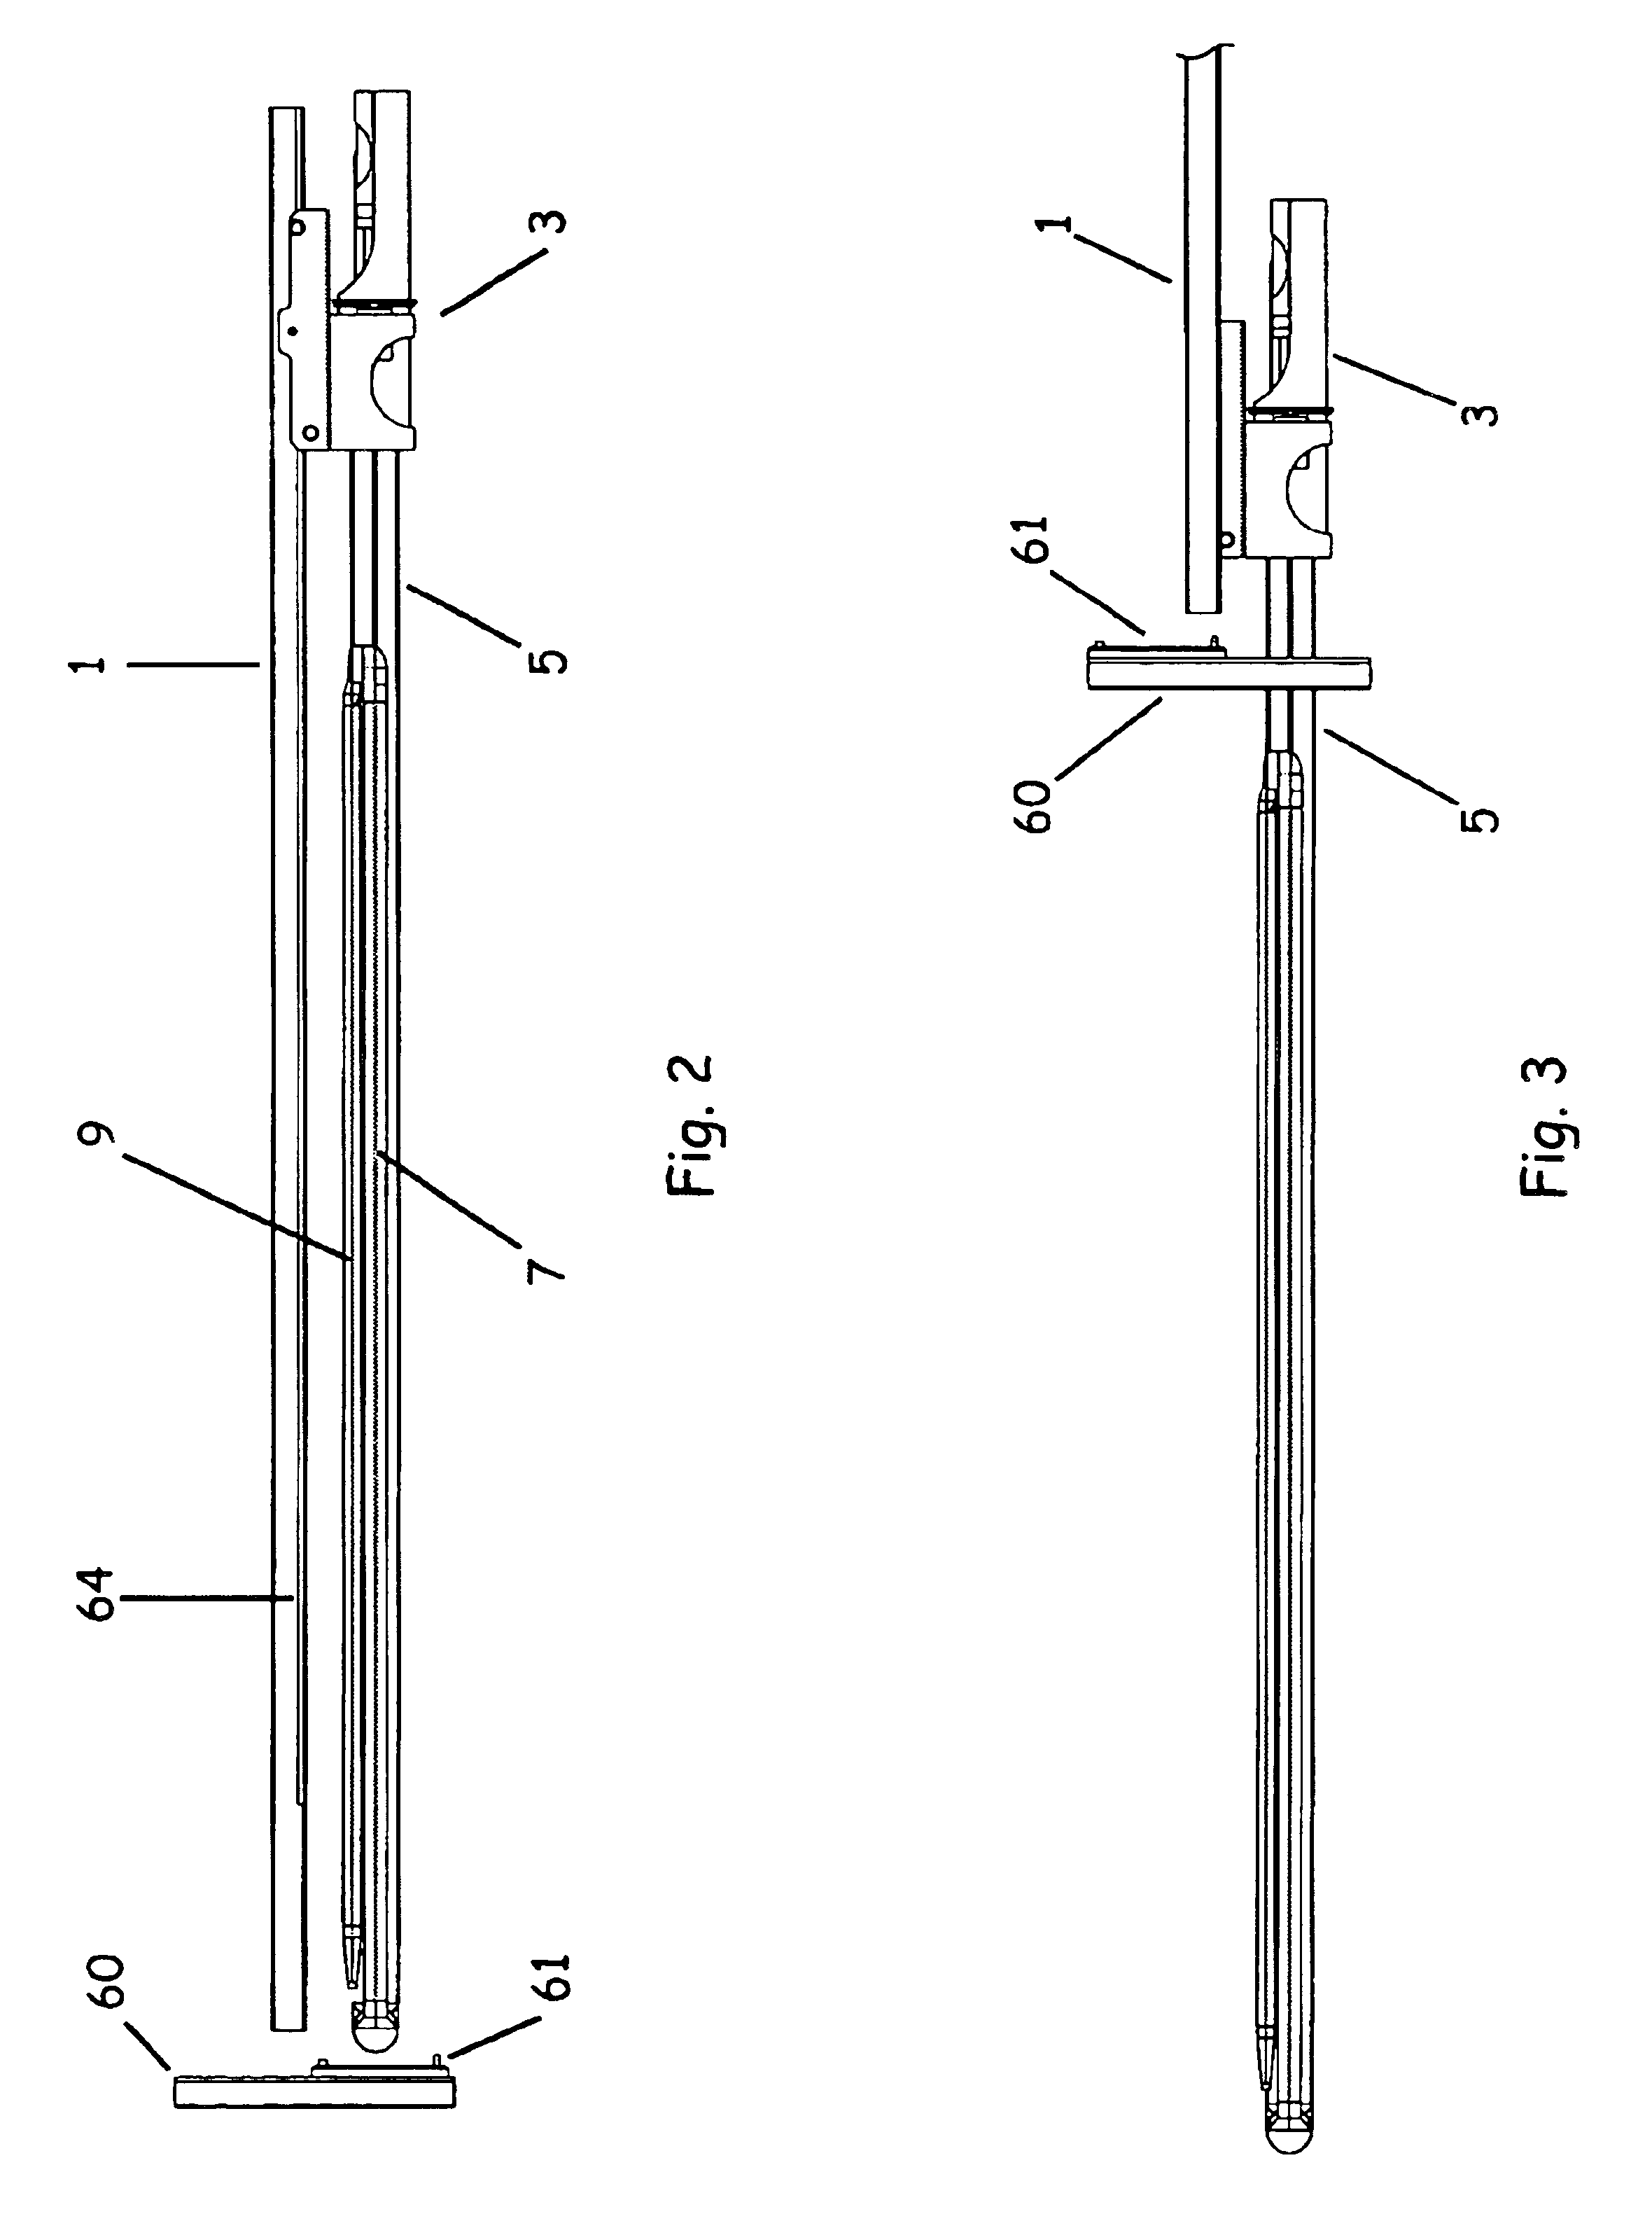 Method and apparatuses to remove slag